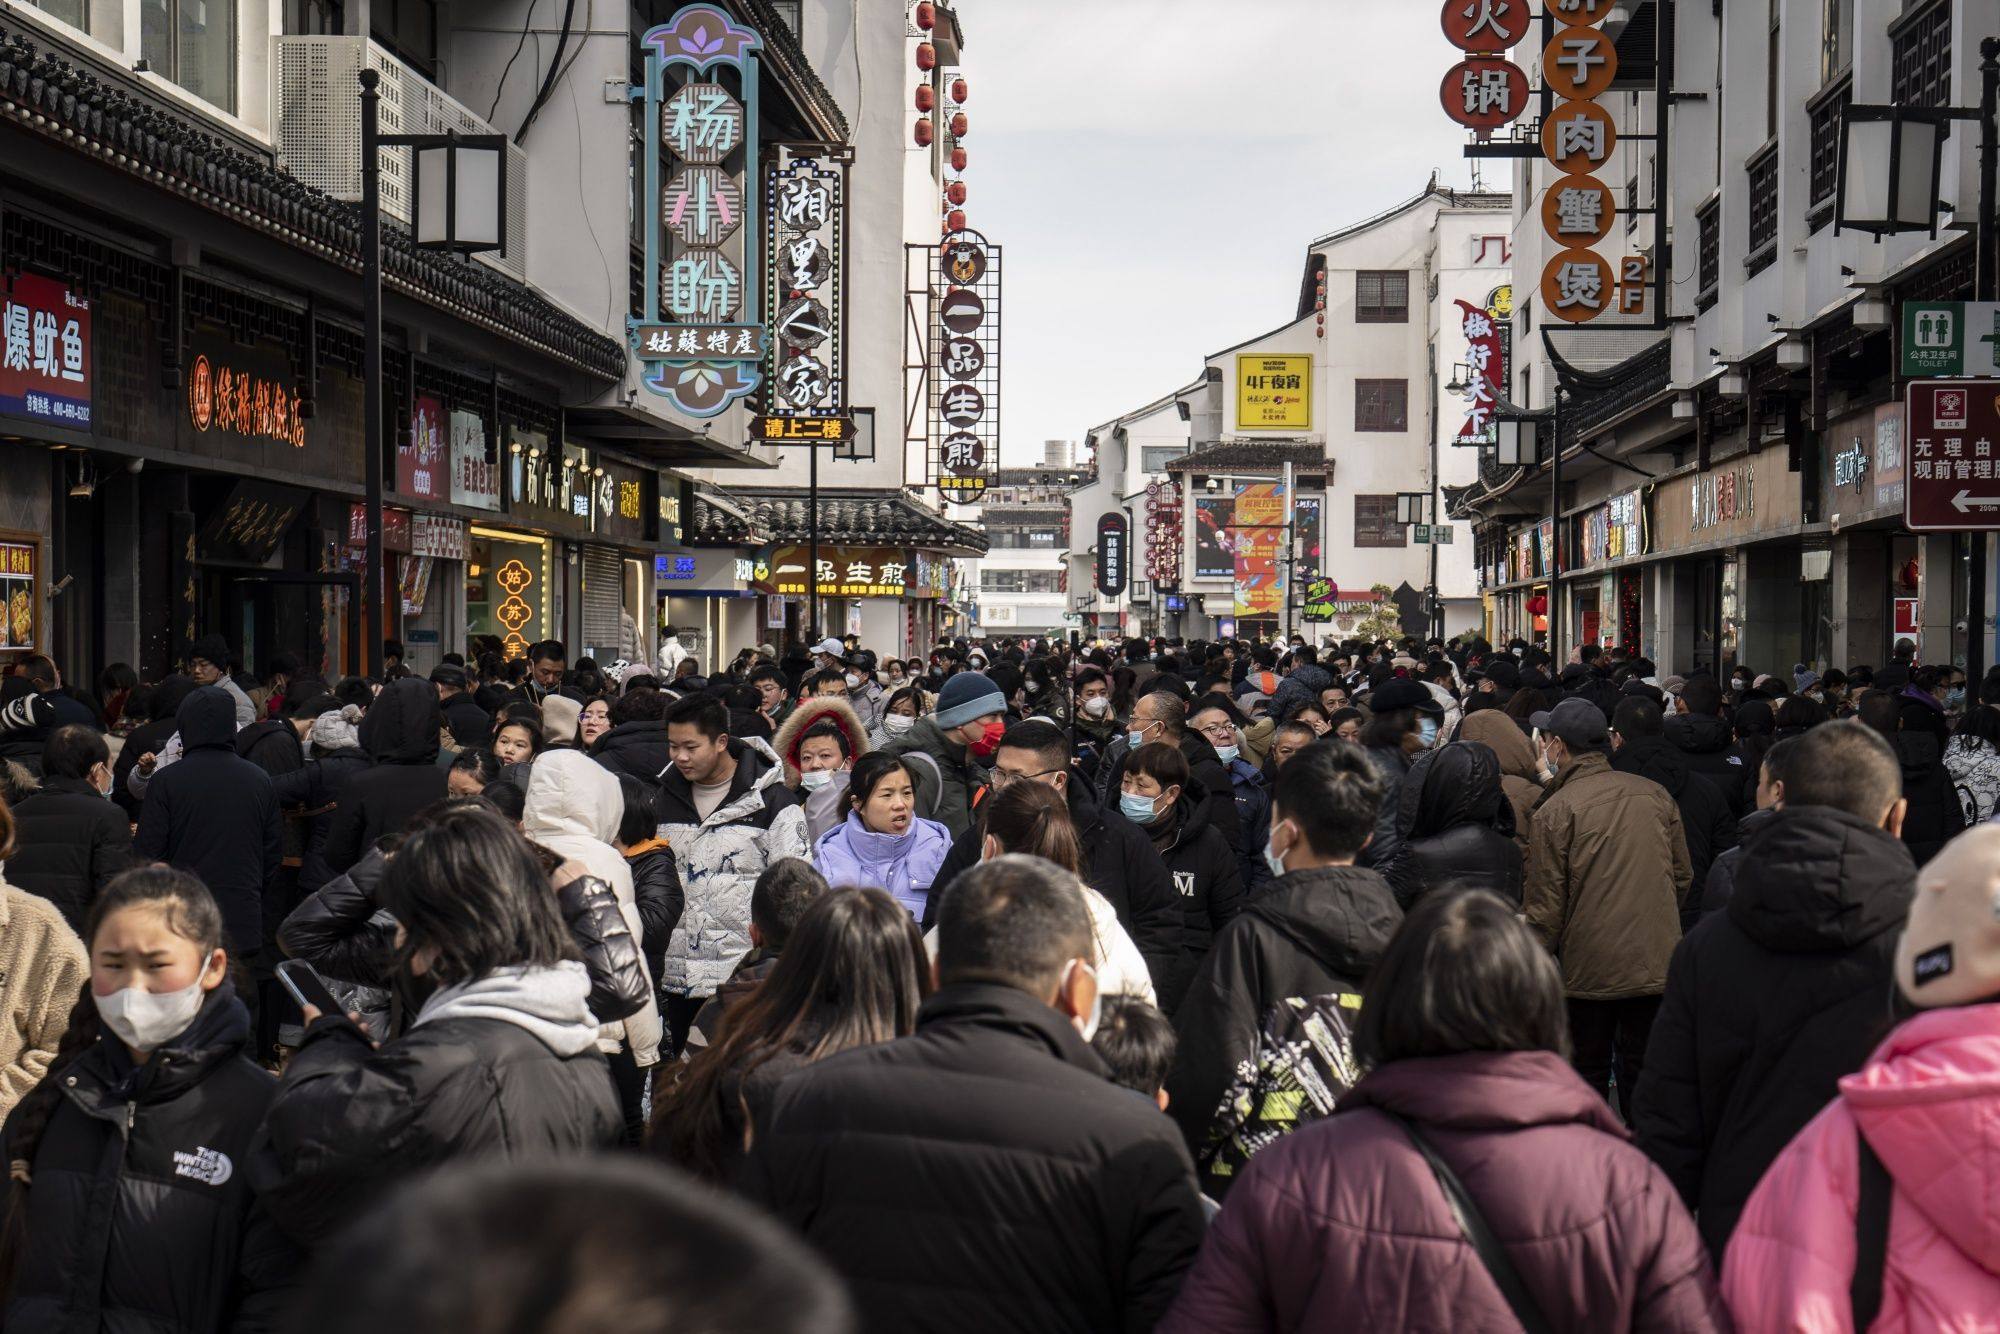 Shoppers in the Guanqian Street shopping area in Suzhou, Jiangsu province, on January 25. China’s Lunar New Year travel and box office figures showed promising returns, adding to evidence that the country’s economic recovery could be around for the long haul. Photo: Bloomberg